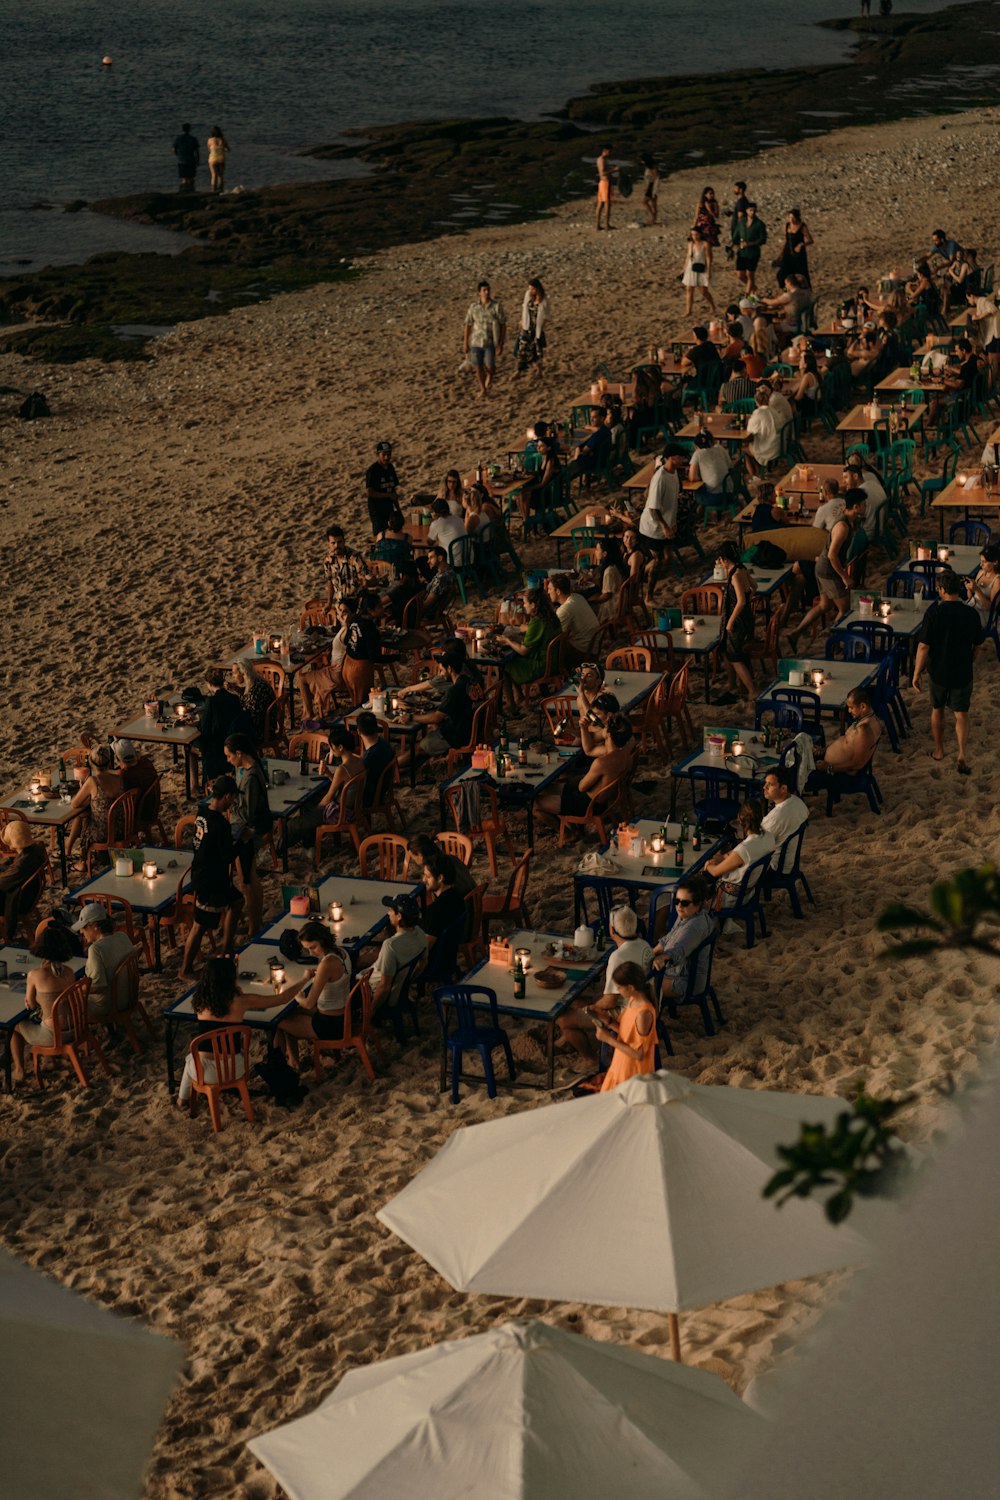 a group of people sitting at tables on a beach